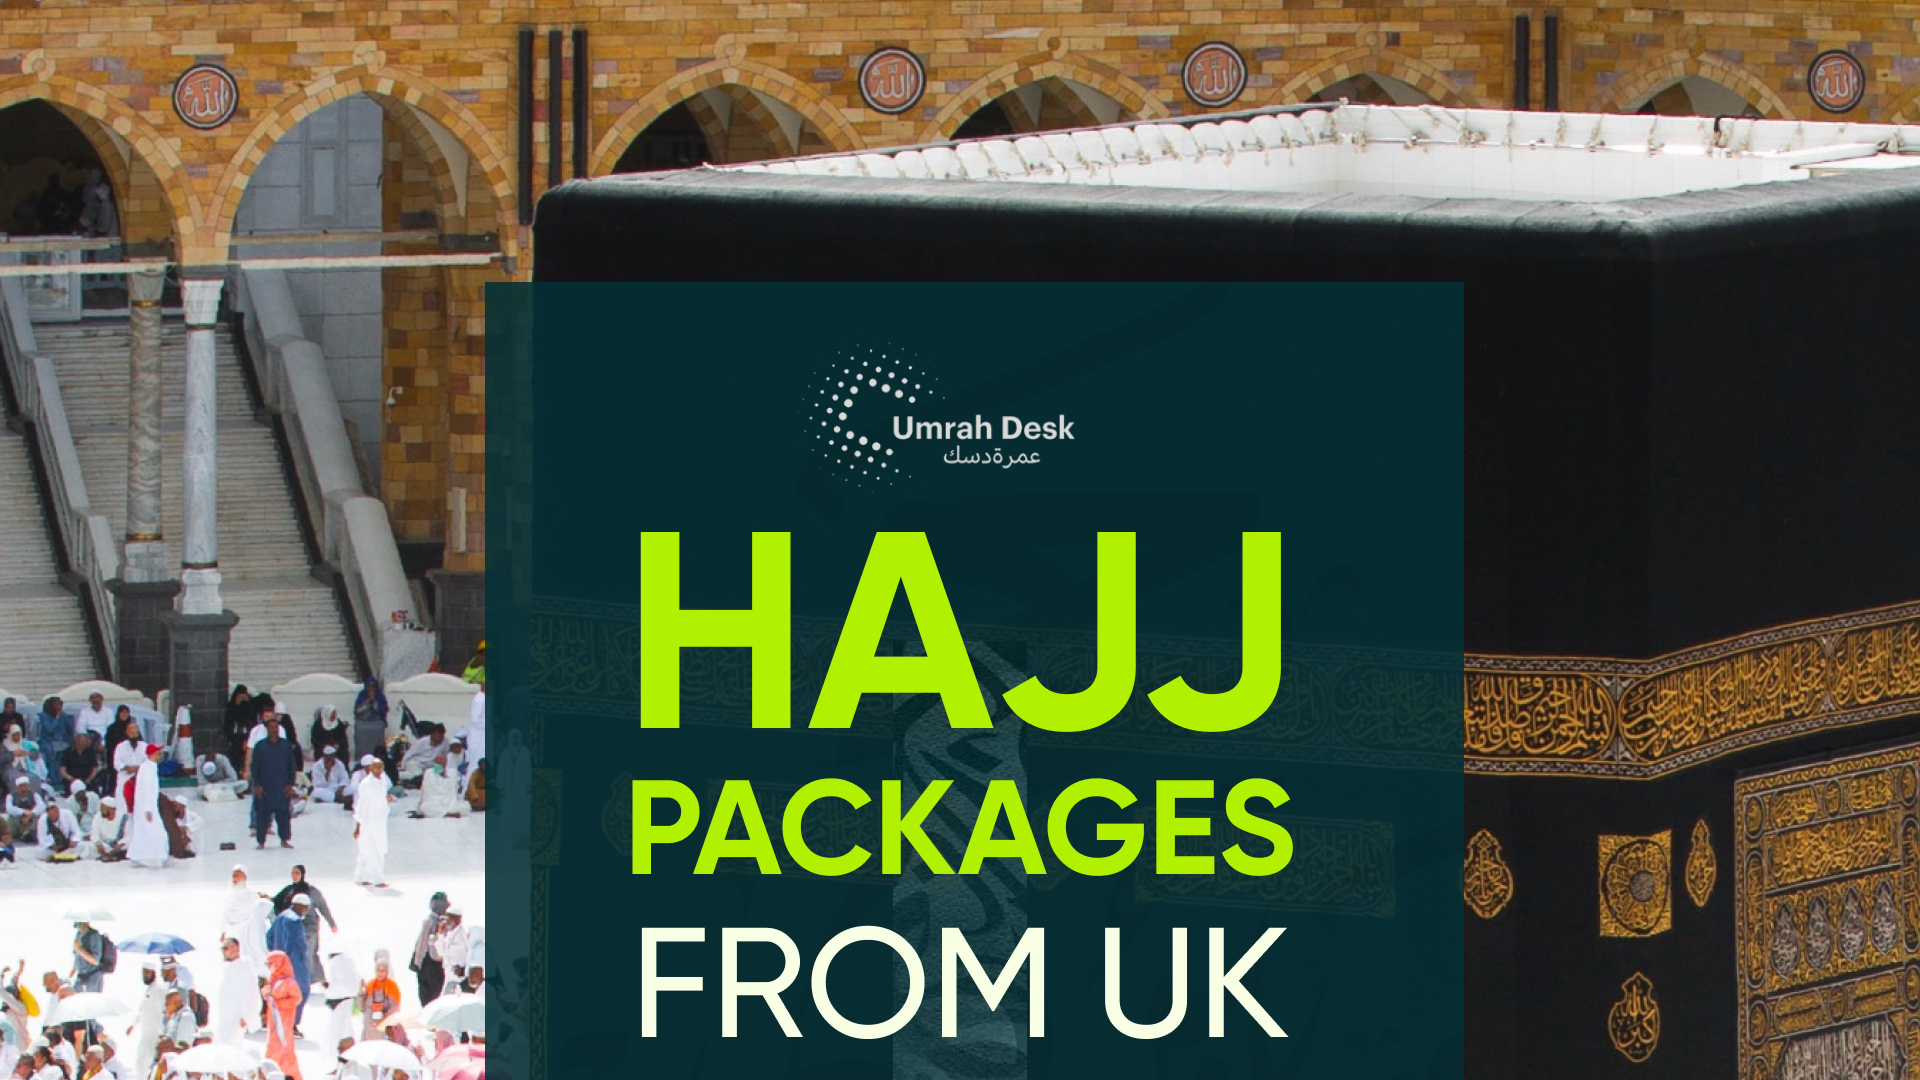 Hajj Packages from uk